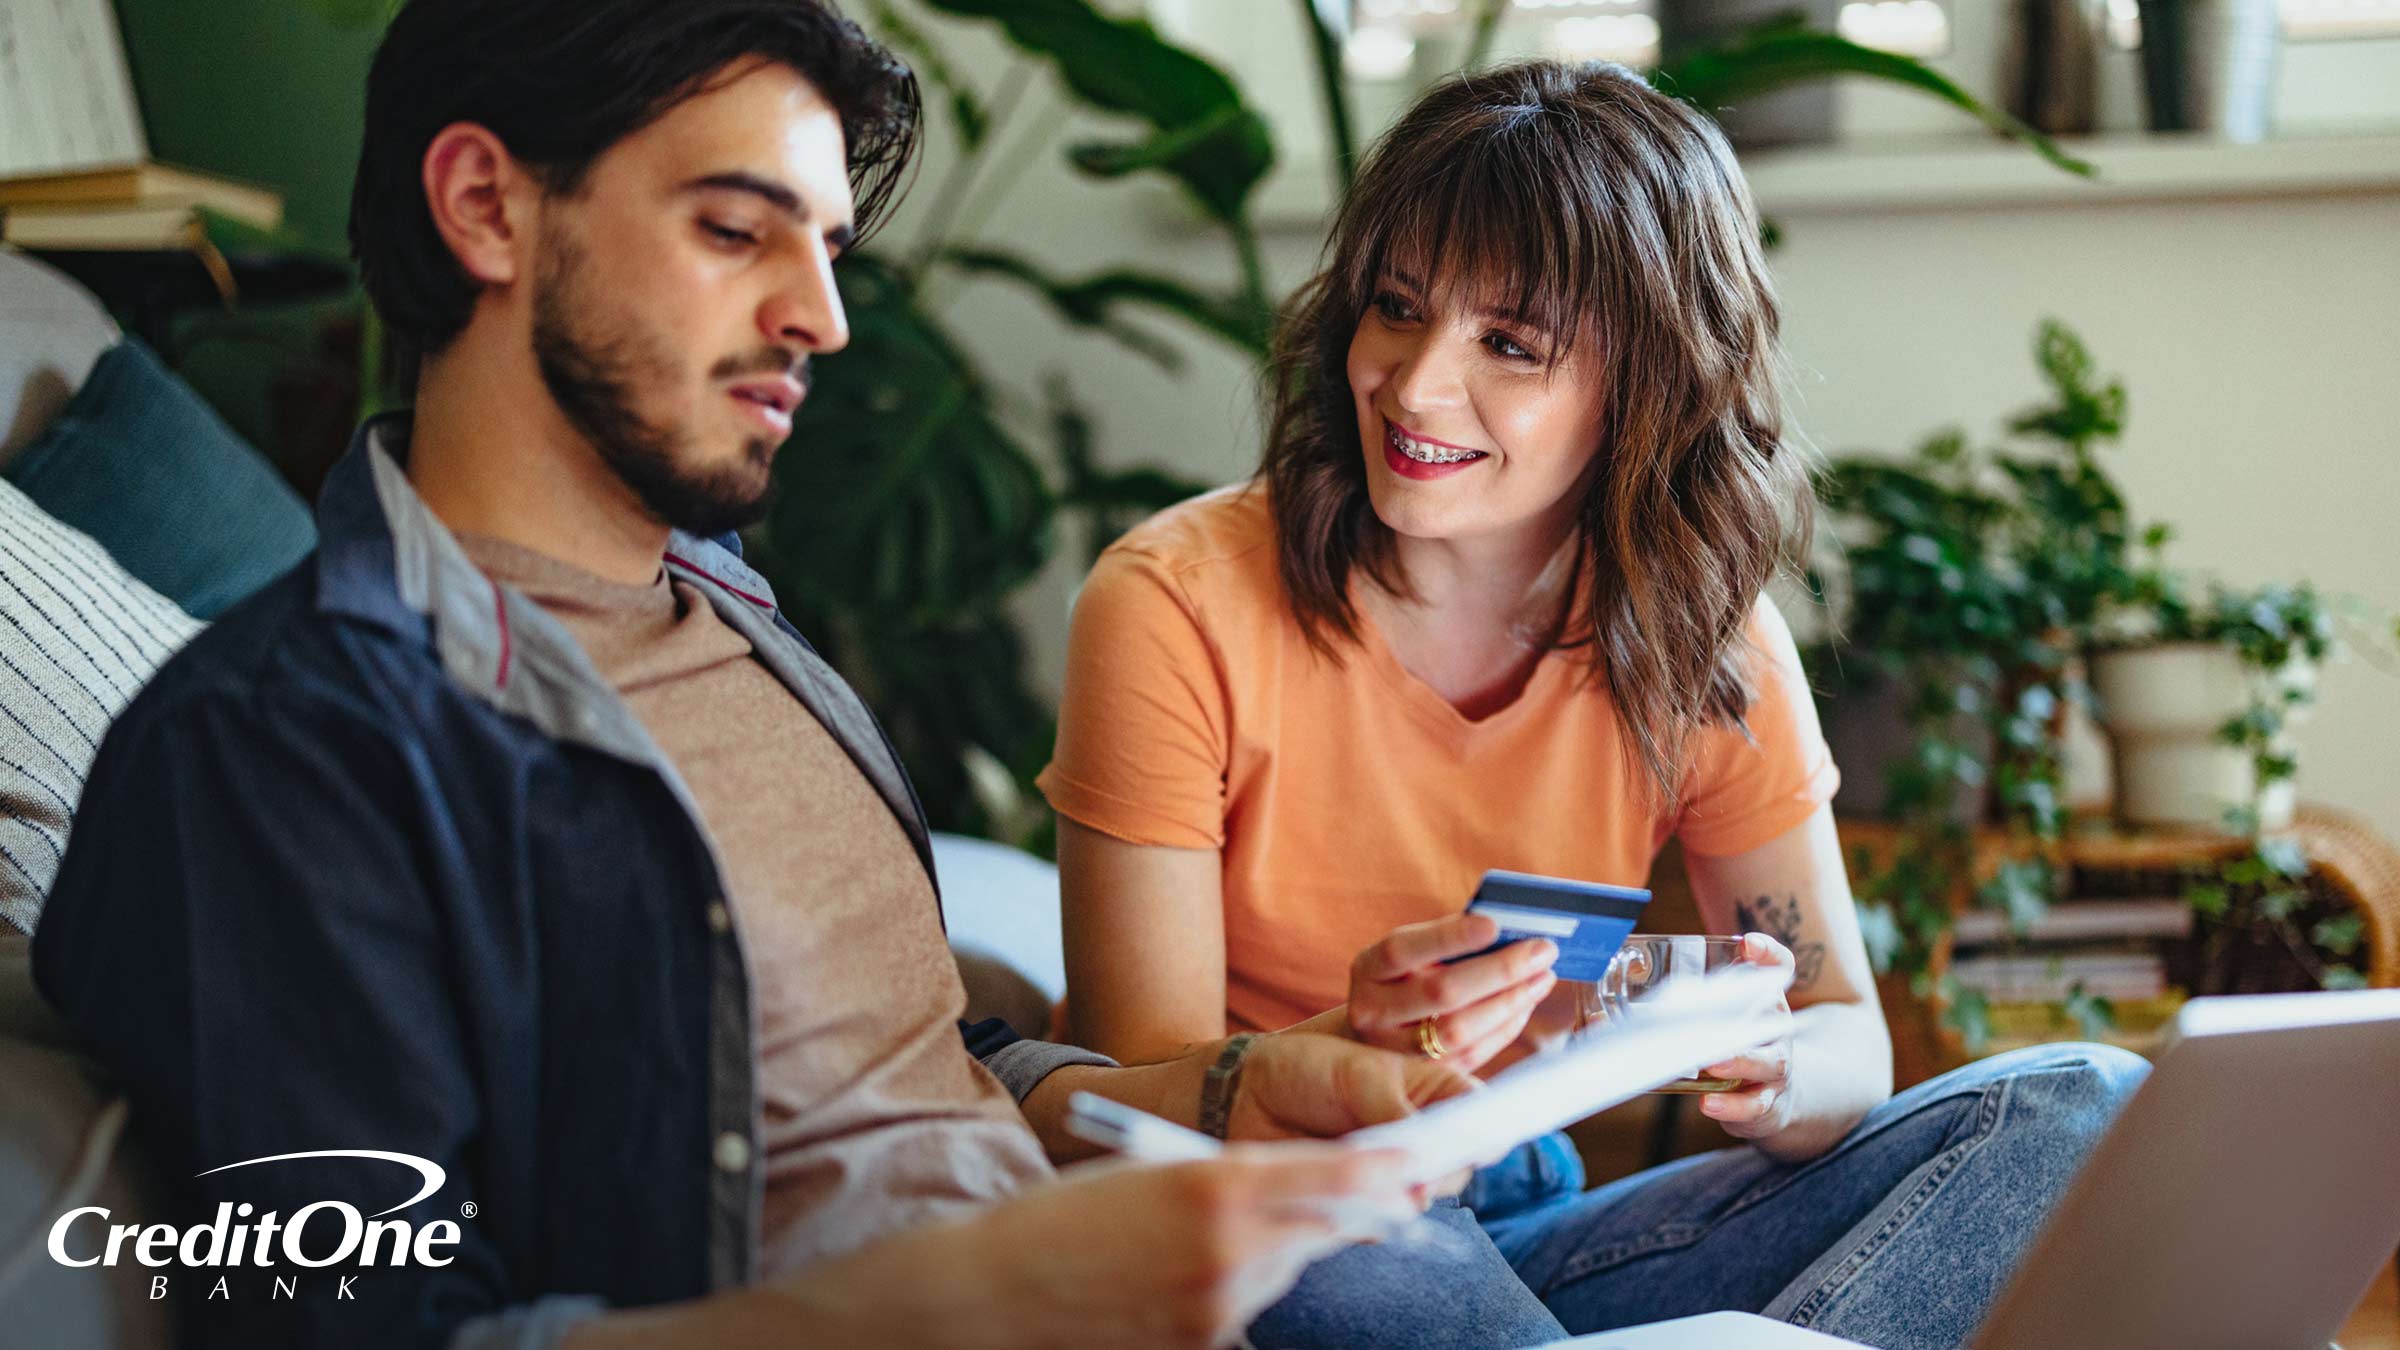 A young couple holds a credit card while checking their paperwork, possibly trying to find out the terms of their credit card insurance protection.